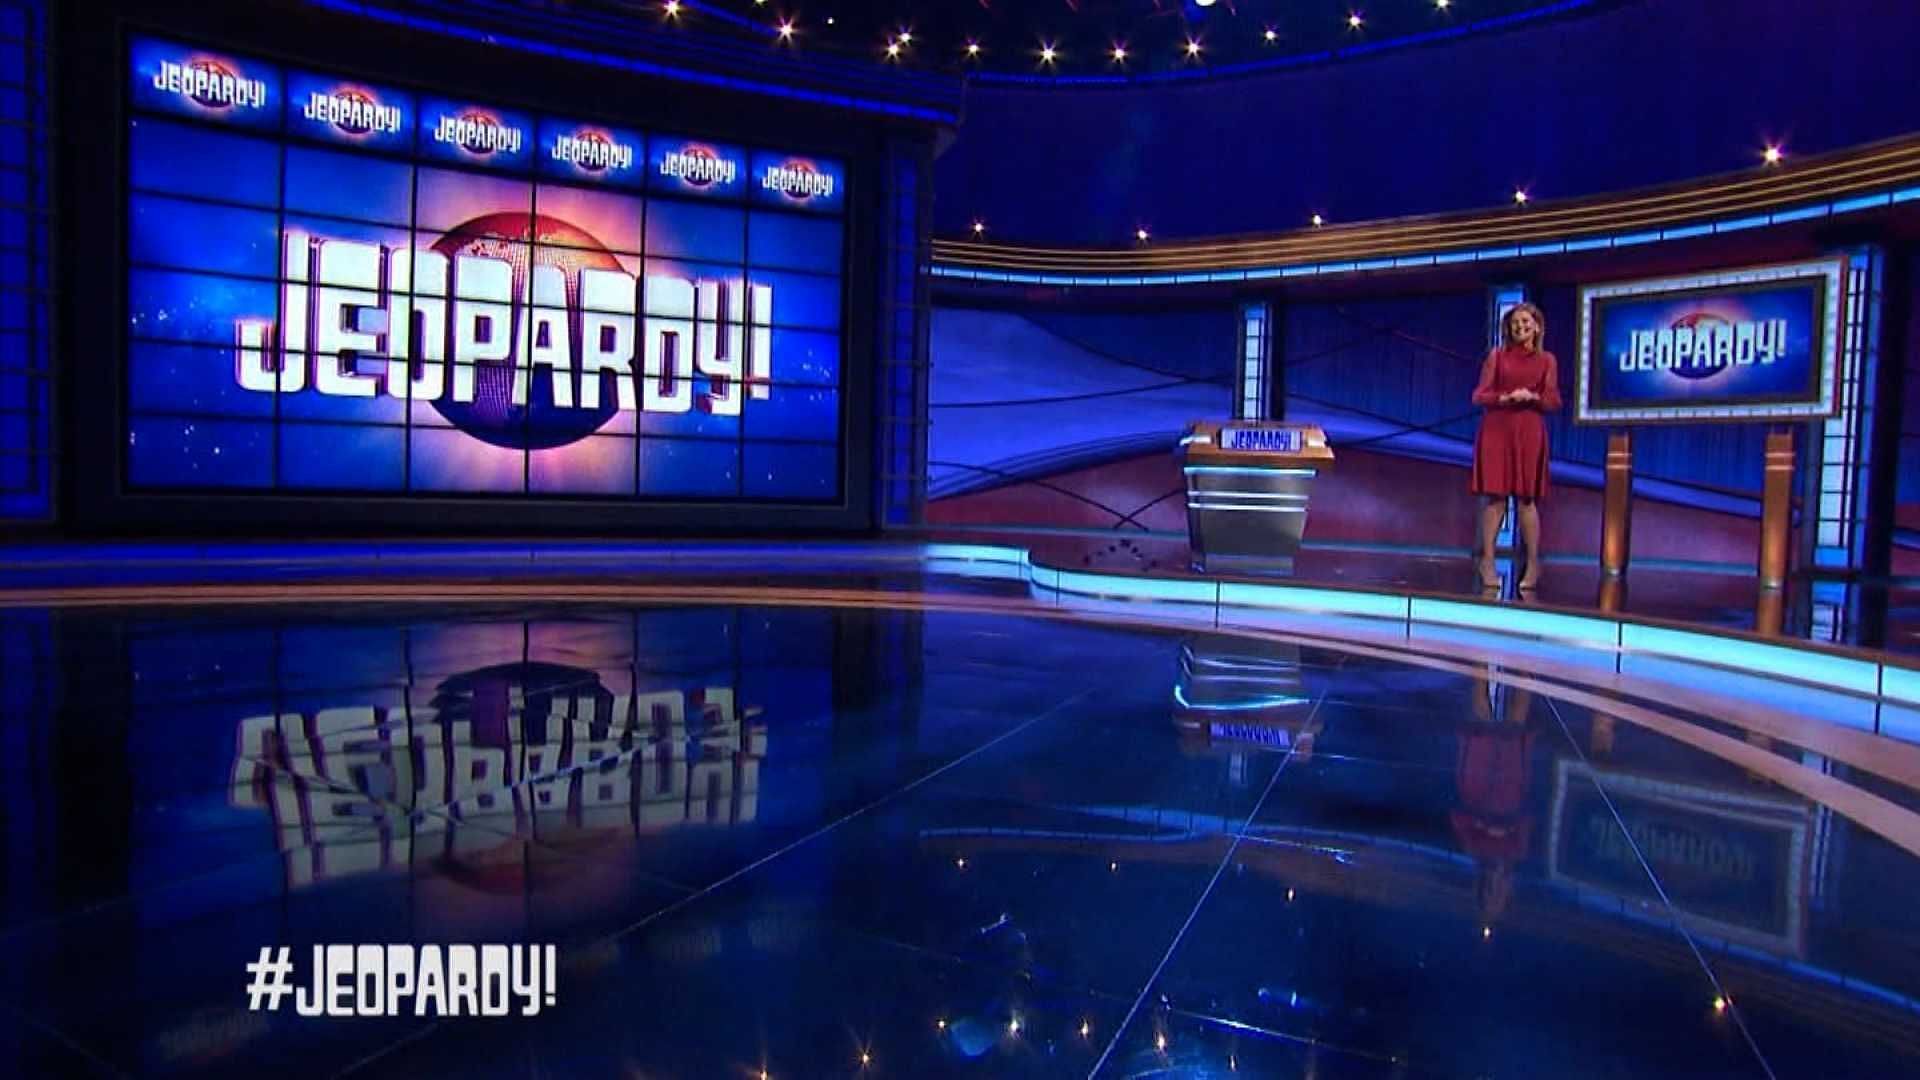 Today’s Final Jeopardy! answer Monday, December 5, 2022